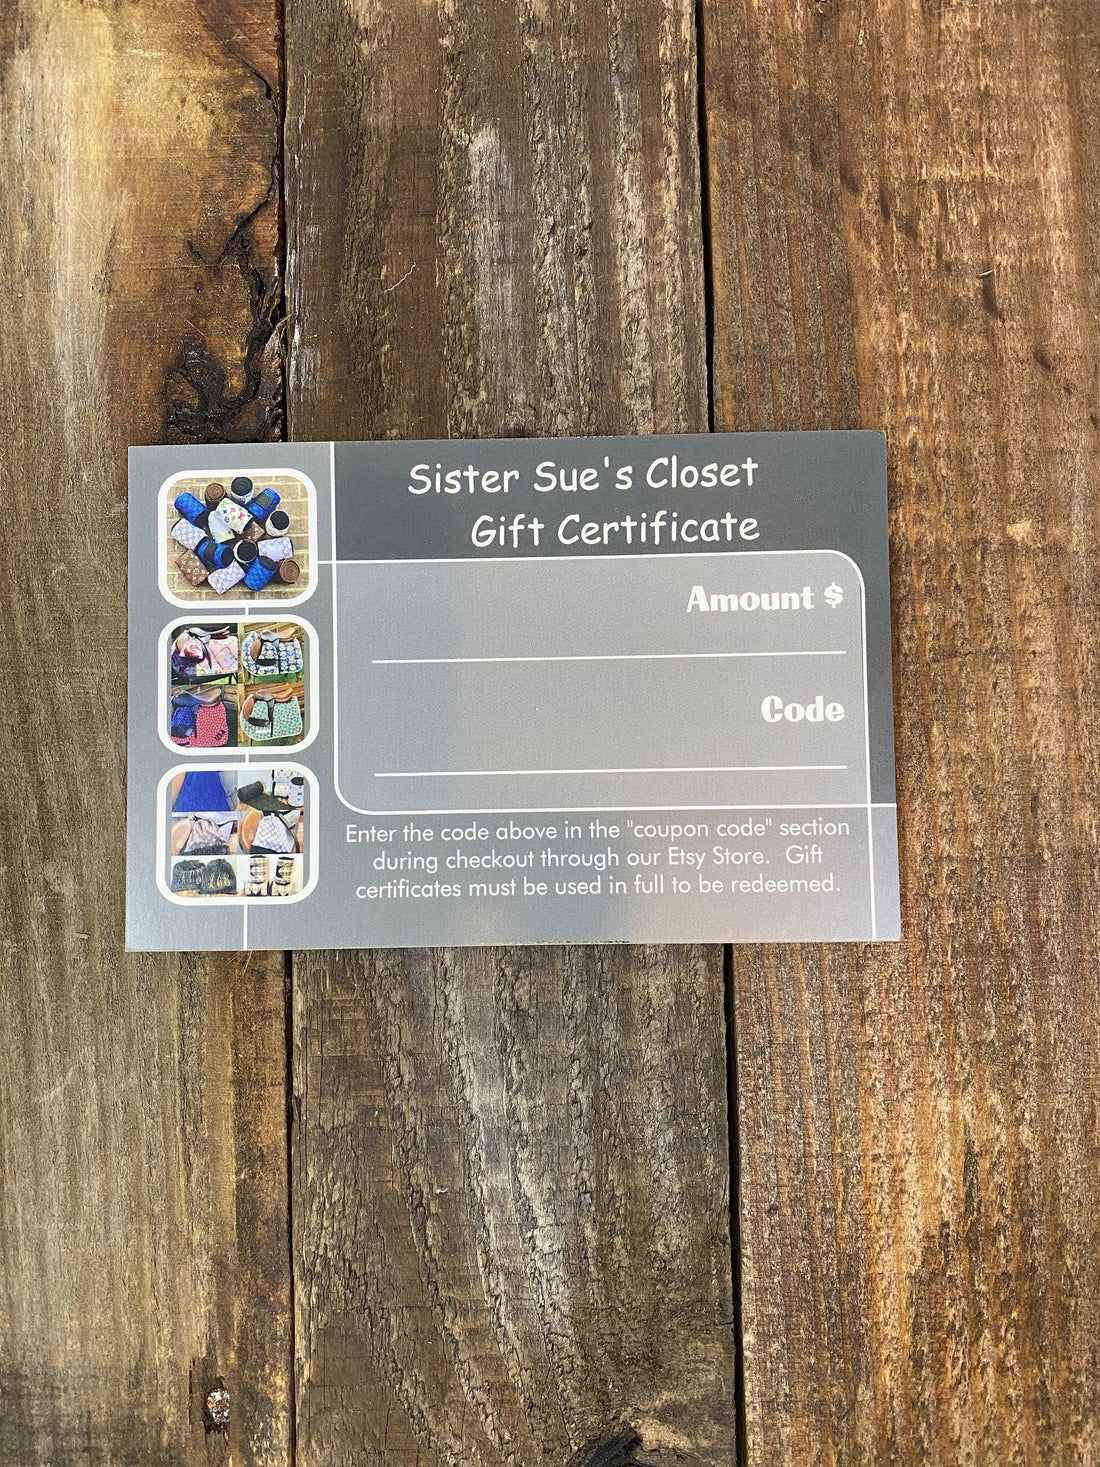 Sister Sue's Closet Gift Certificate or Gift Card - Sister Sue's Closet